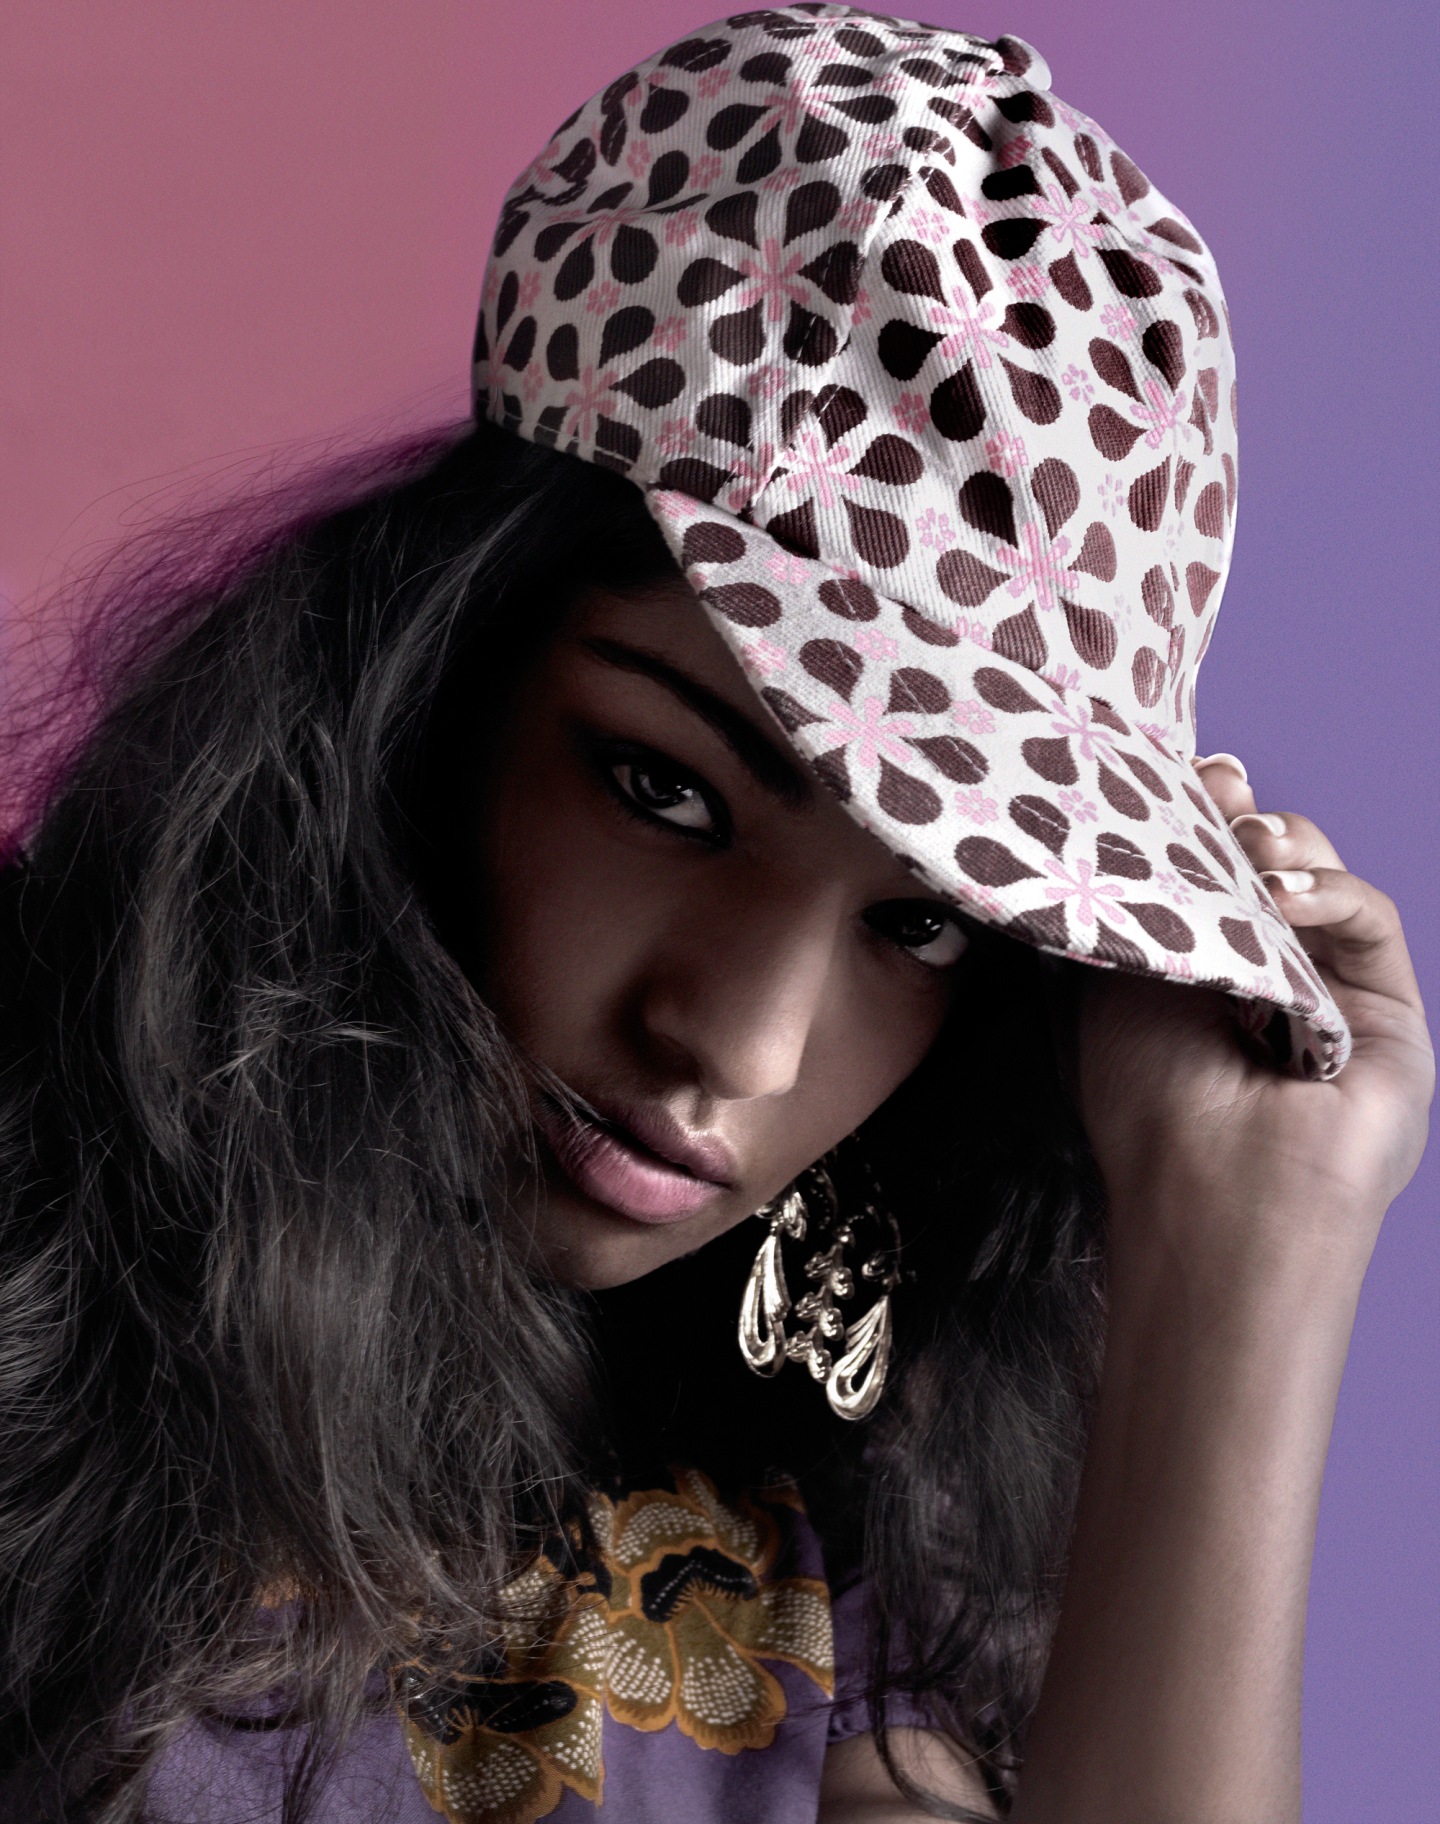 M.I.A.’s 2004 Cover Story Is A Reminder That She’s The OG DIY Pop Star